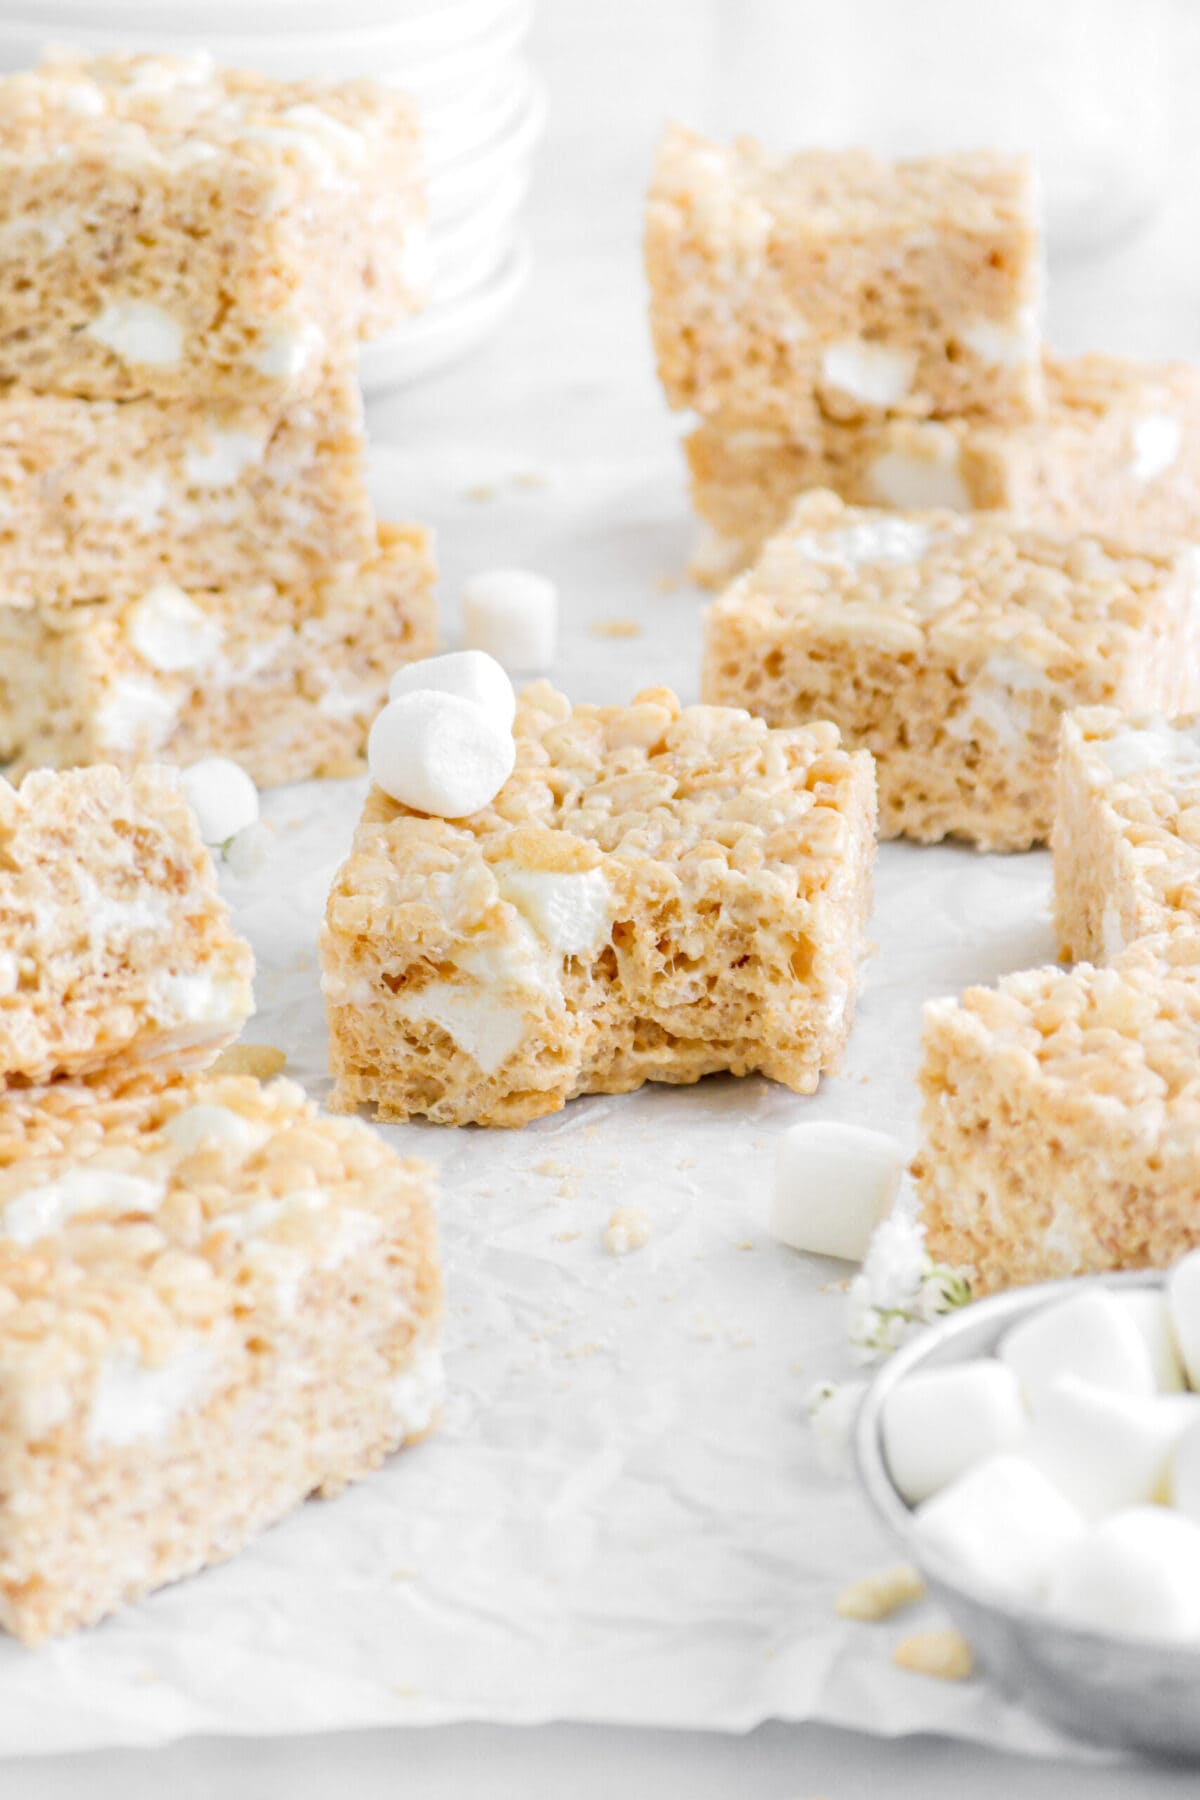 rice krispie treat with bite missing and two marshmallows on top with ten more rice krispie treats around.